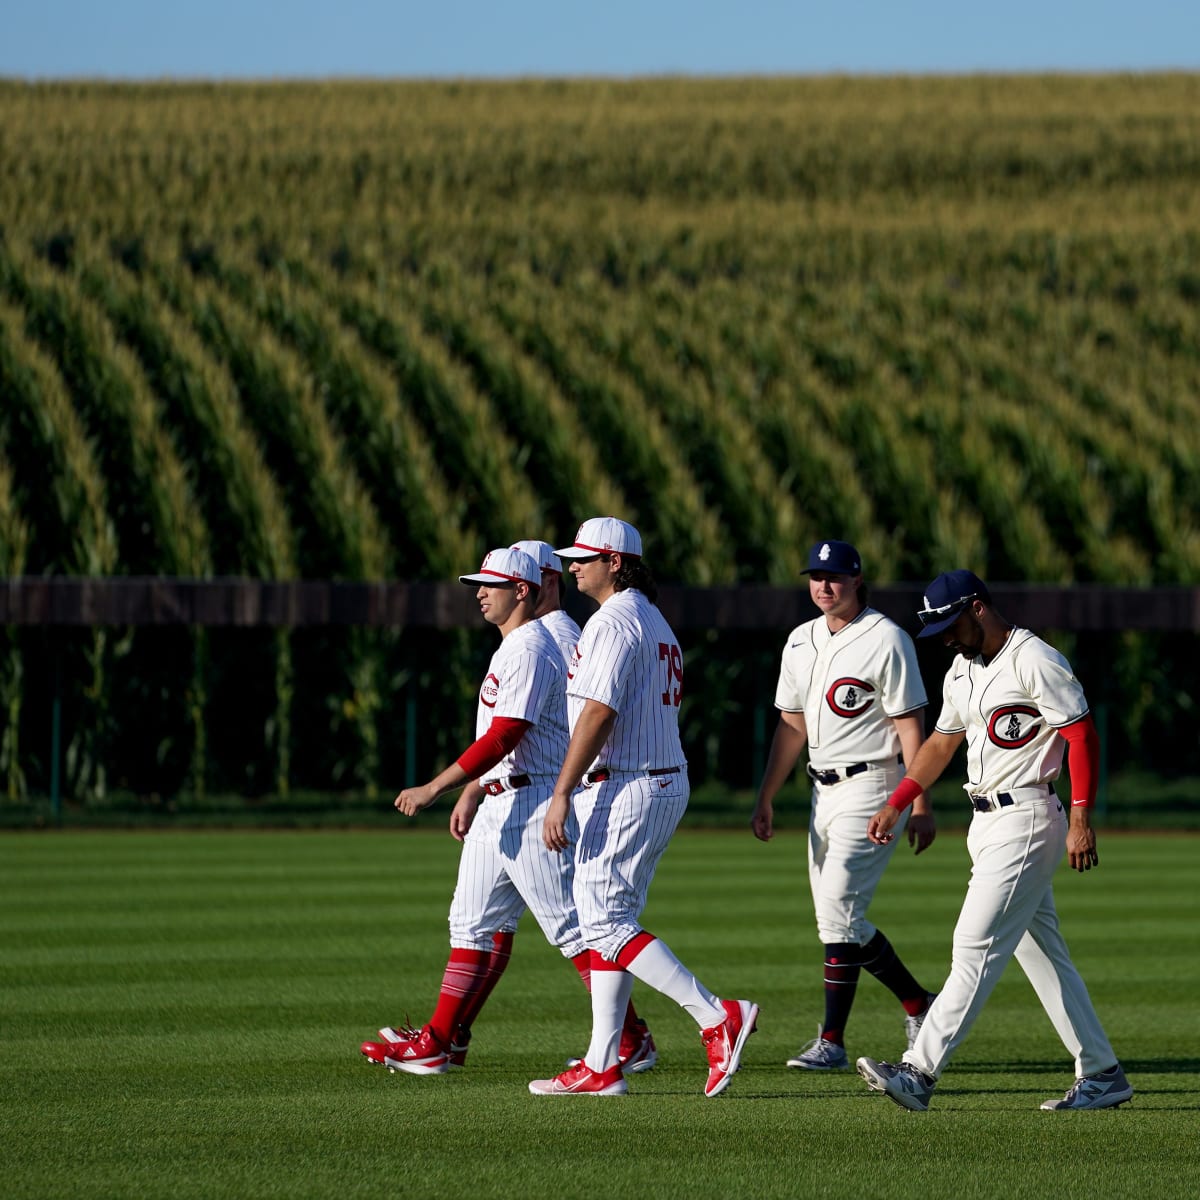 reds and cubs field of dreams uniforms